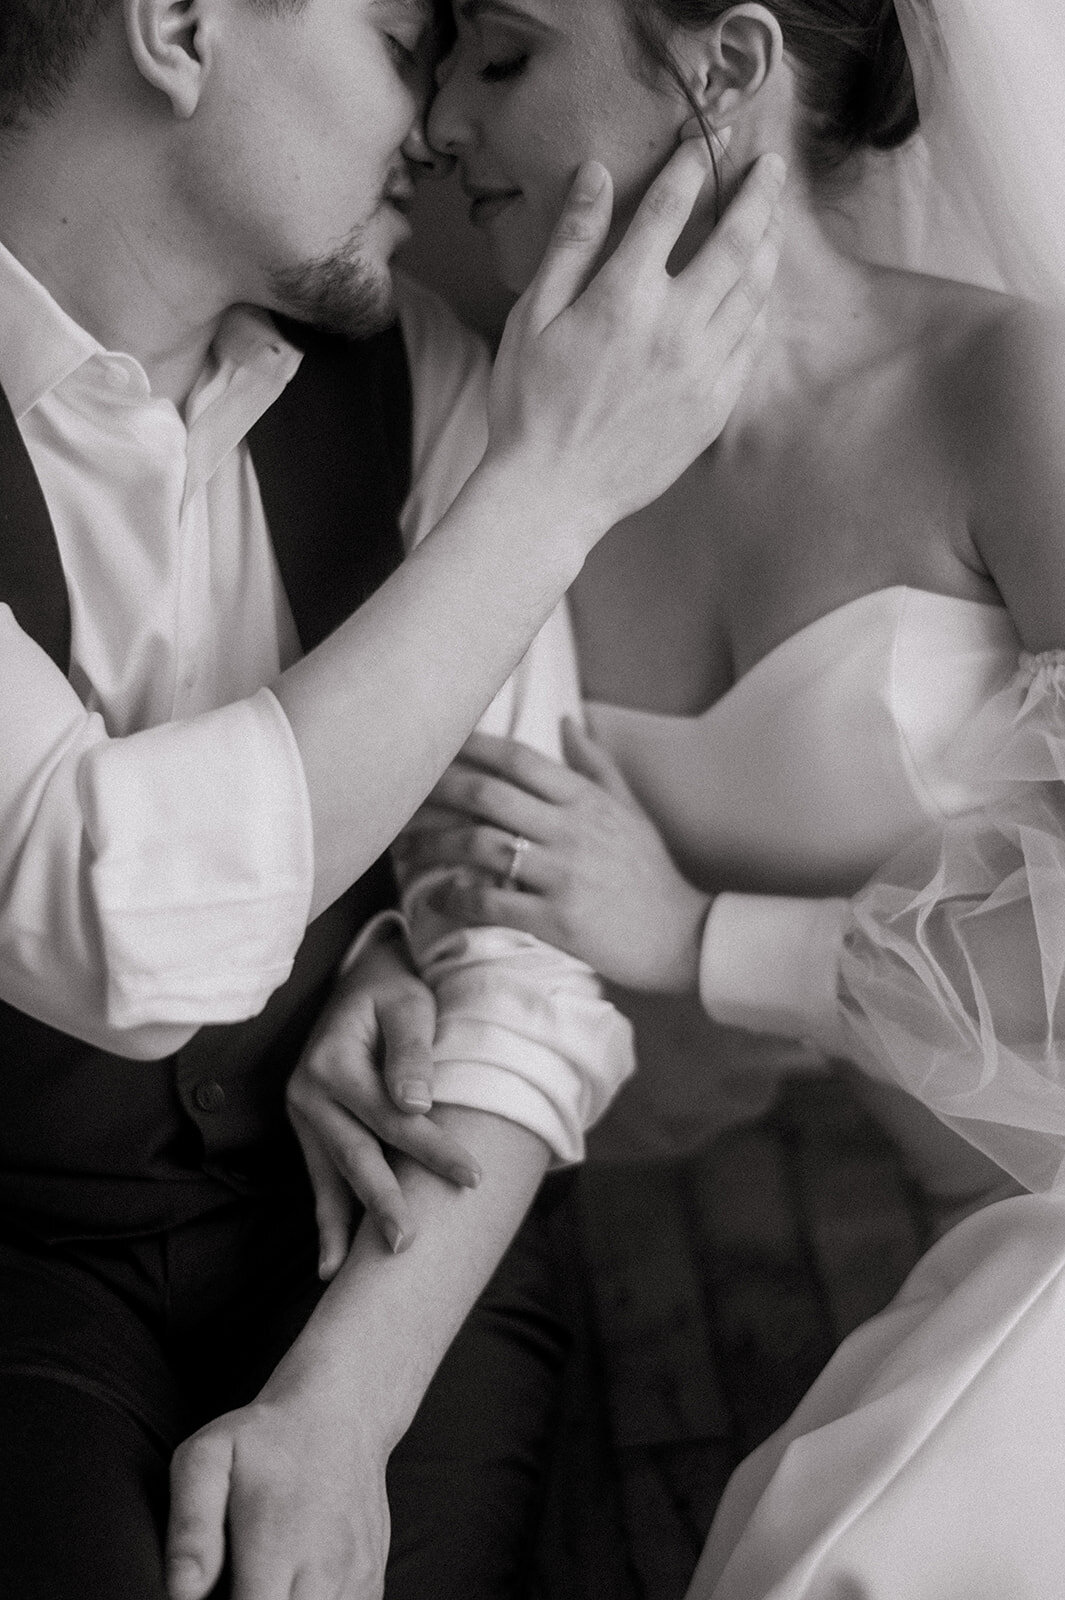 groom touches brides face as they share embrace photo by cait fletcher photography